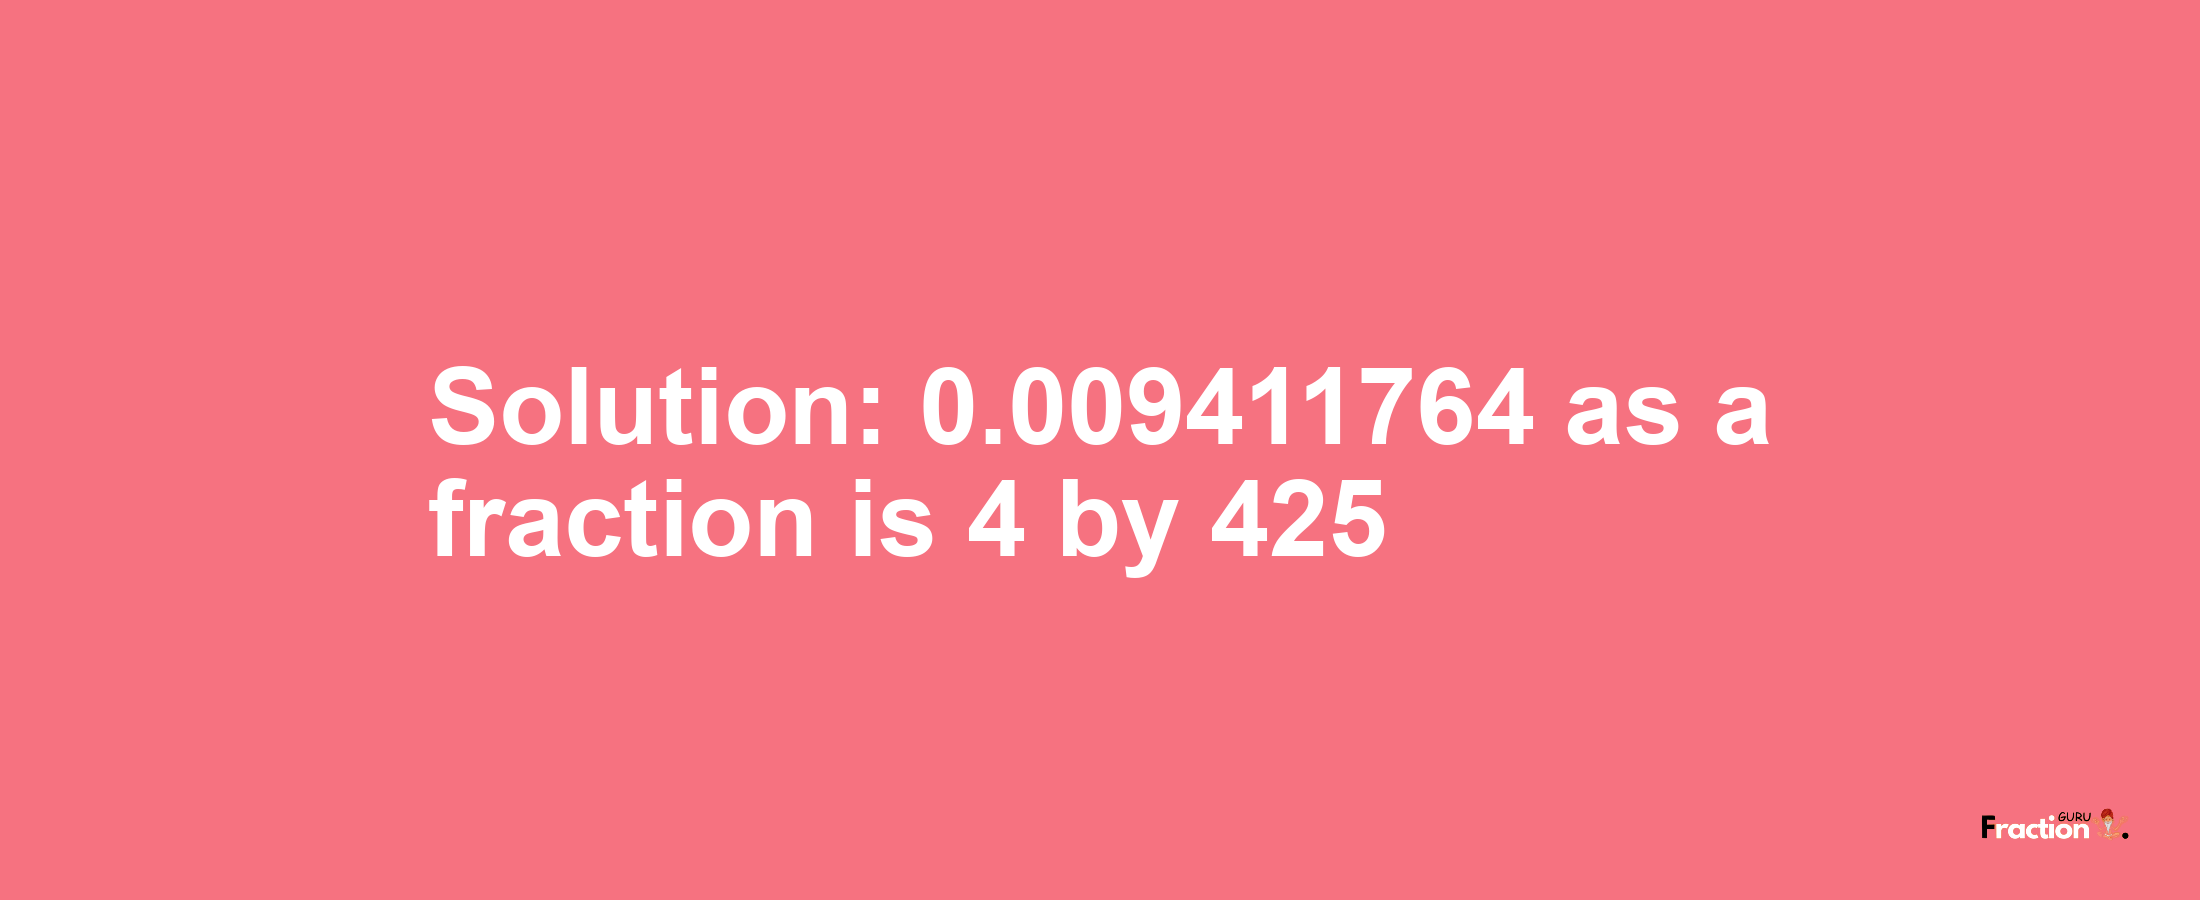 Solution:0.009411764 as a fraction is 4/425